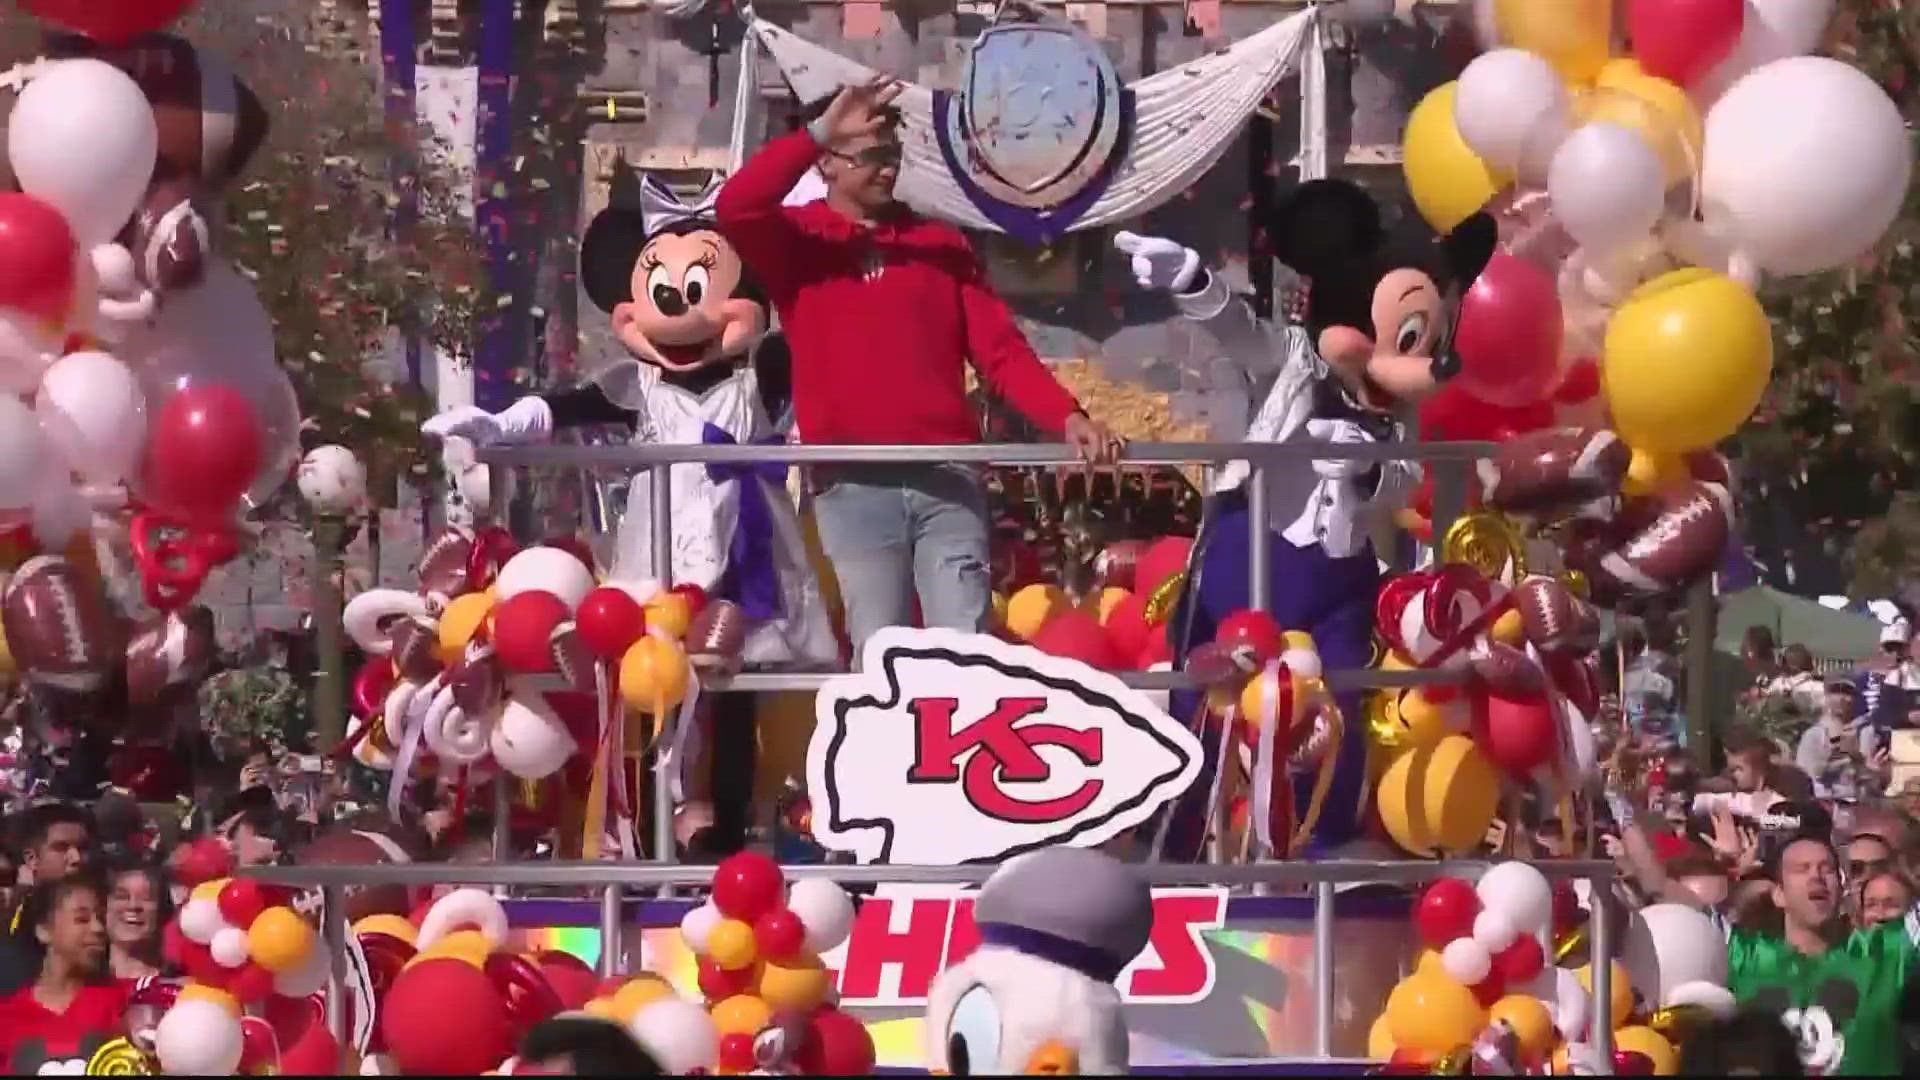 After the Kansas City Chiefs won the Super Bowl against the Philadephia Eagles, the MVP, Patrick Mahomes, decided to celebrate by spending a day at Disneyland.